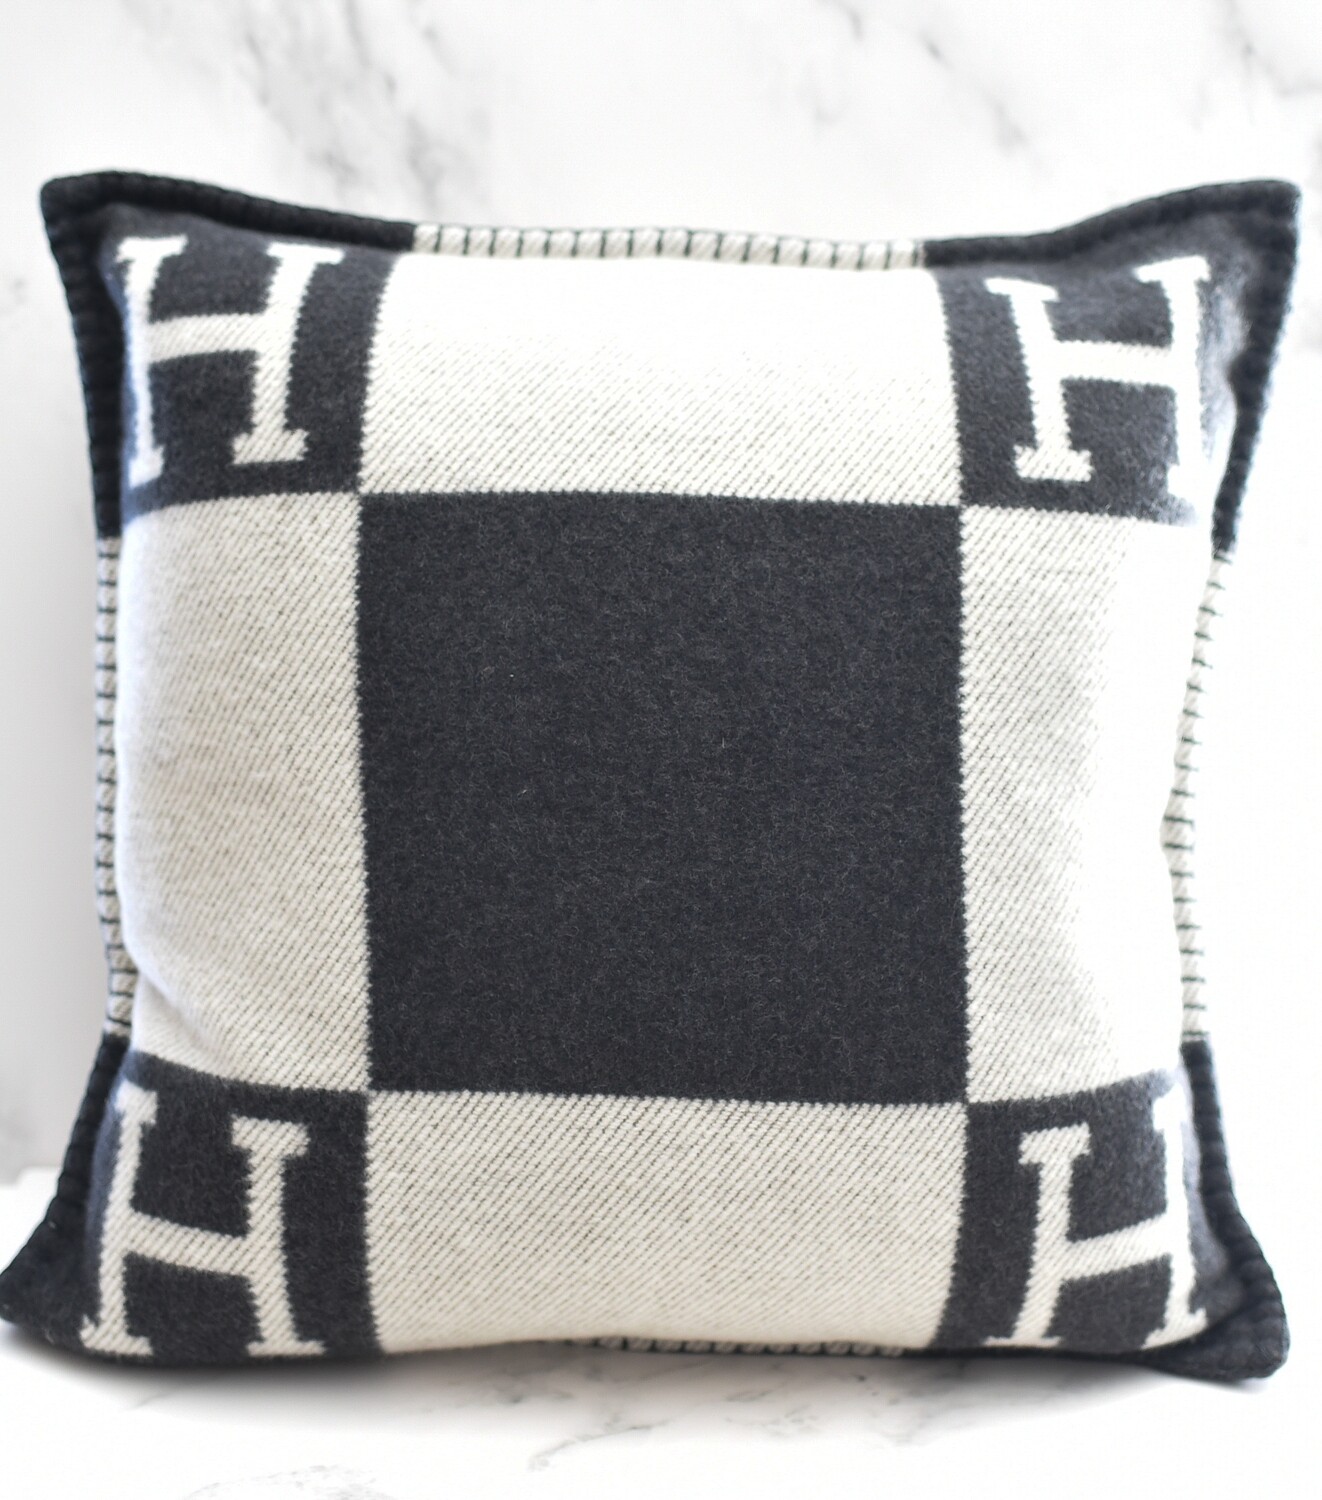 Hermes Pillow, Wool Cashmere Avalon PM Pillow, New in Dustbag GA001